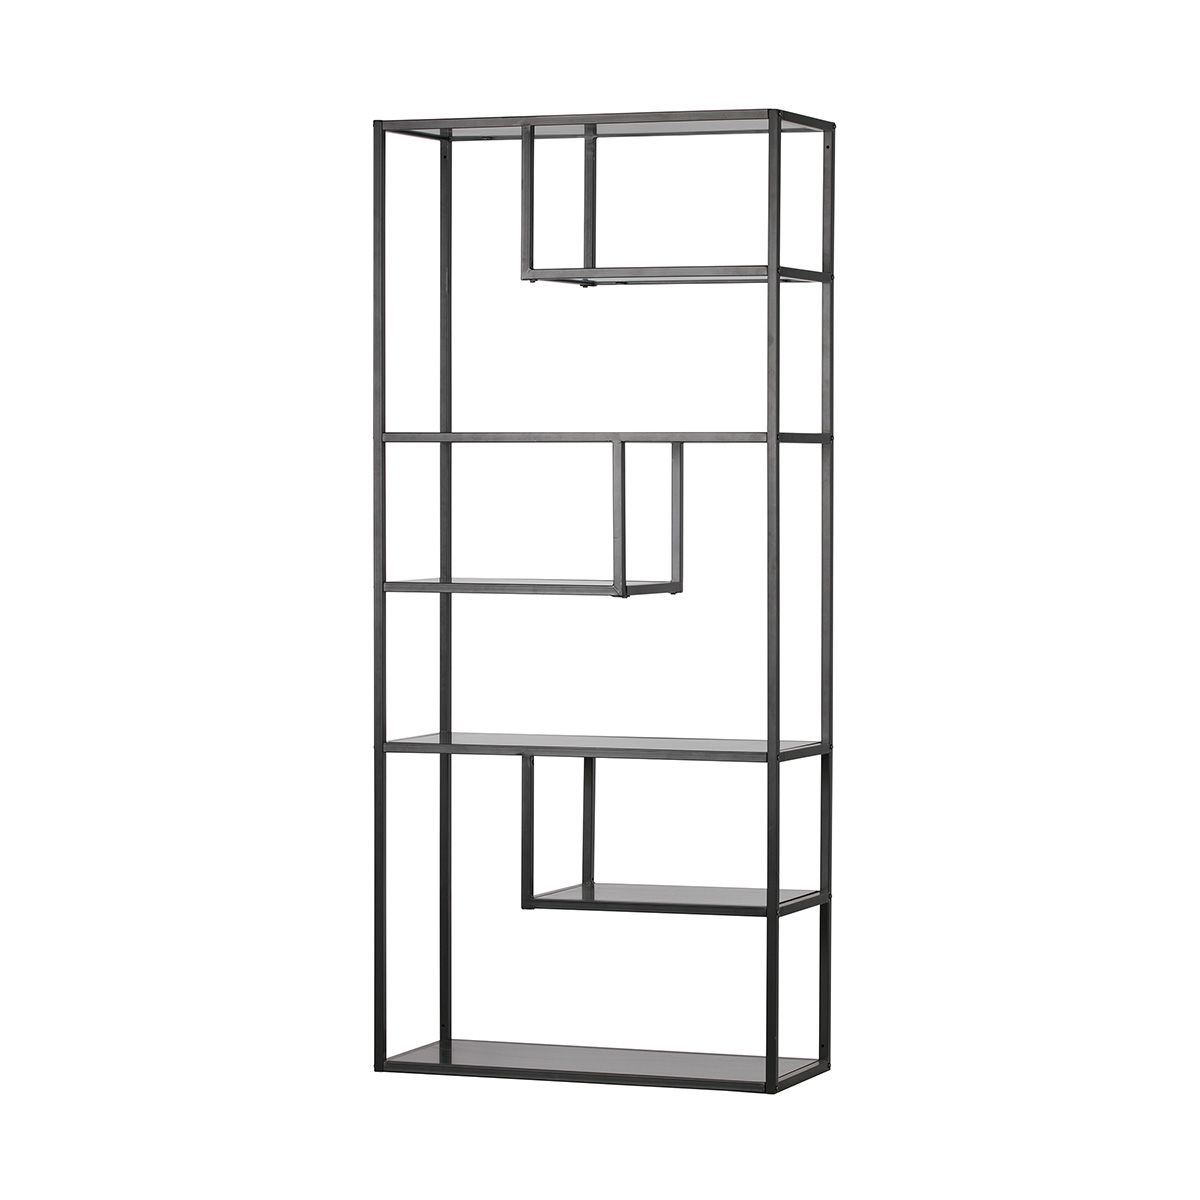 Teun black metal bookcase shelf Made by Woood – Decoclico